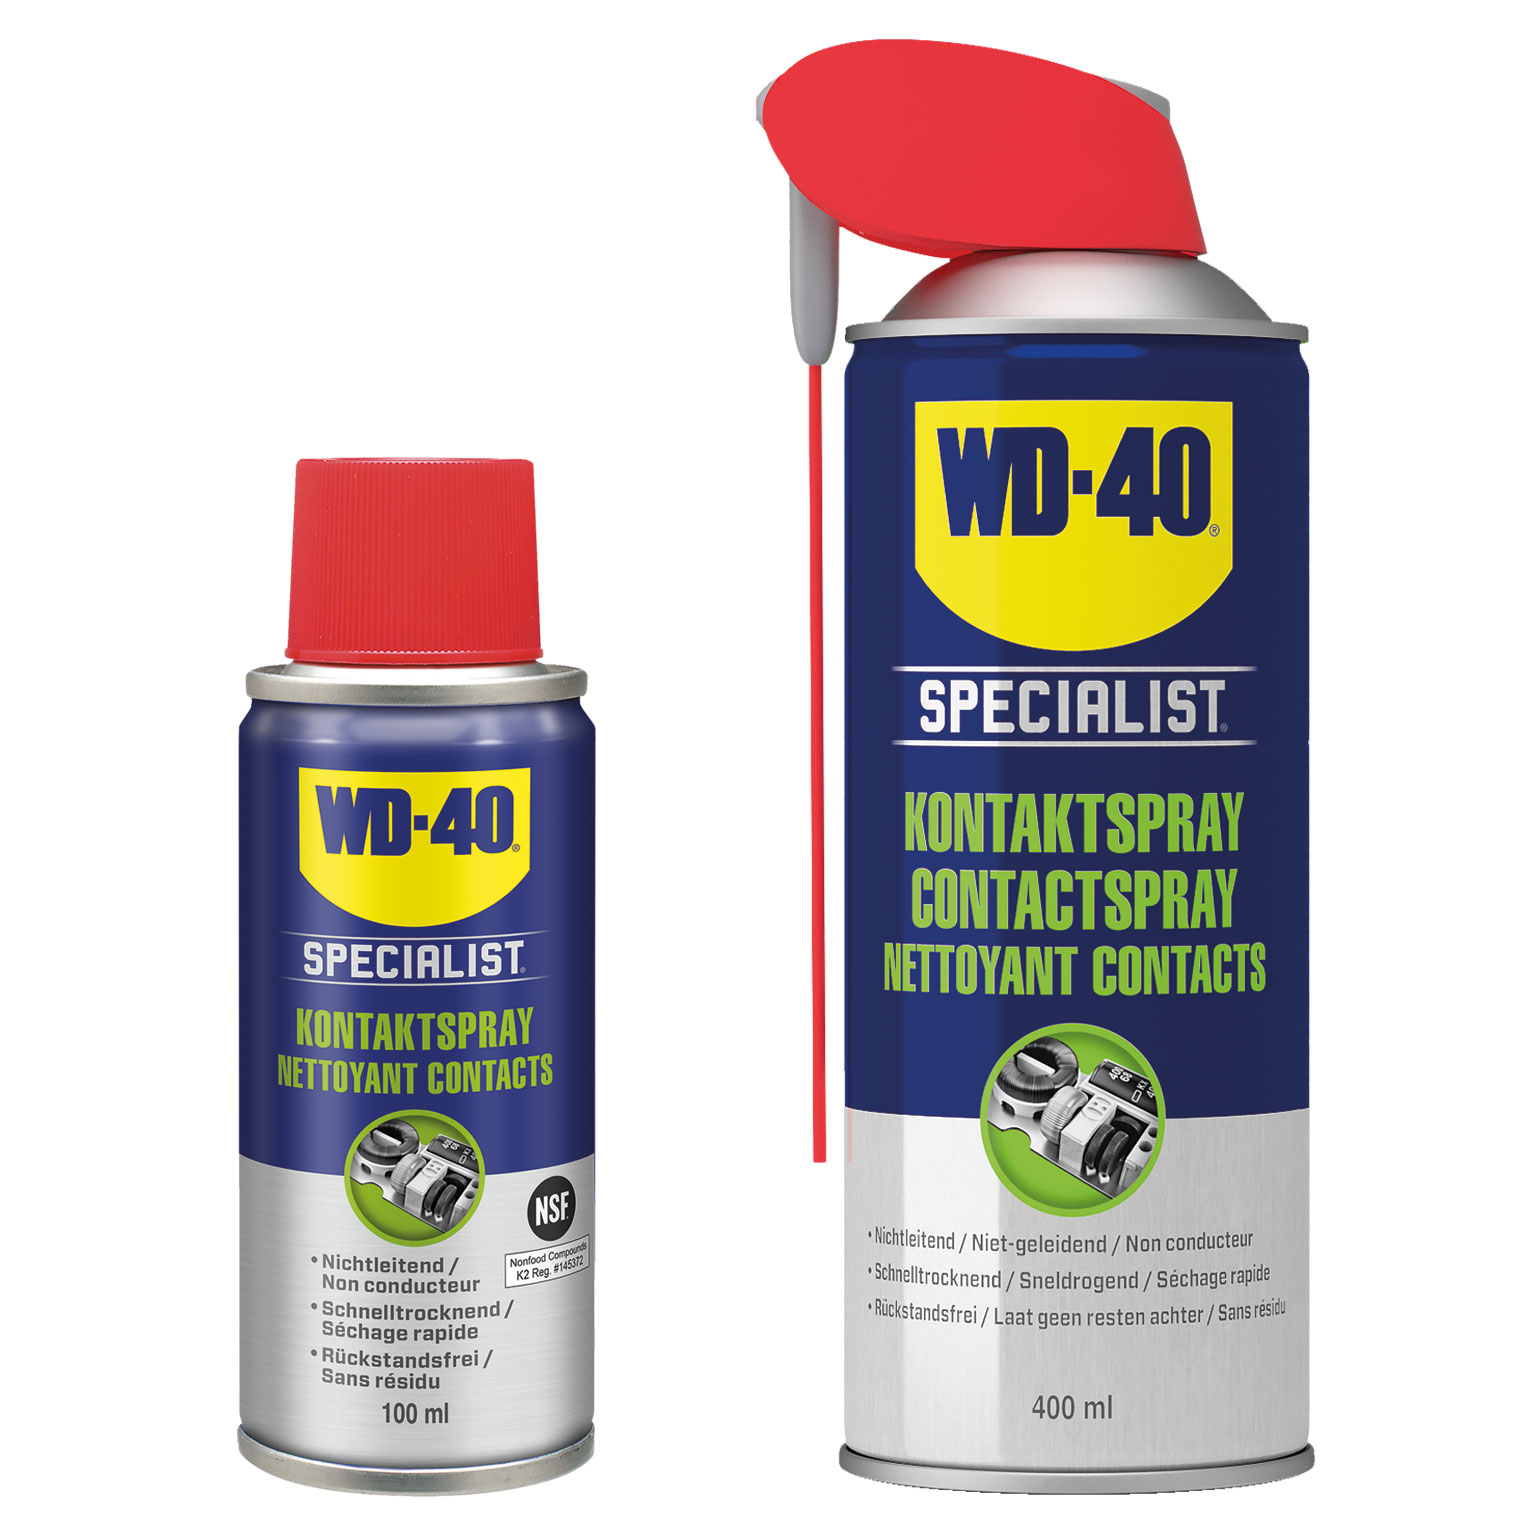 WD-40 Specialist Fast Drying Contact Cleaner 400ml Smart Straw spray -  online purchase